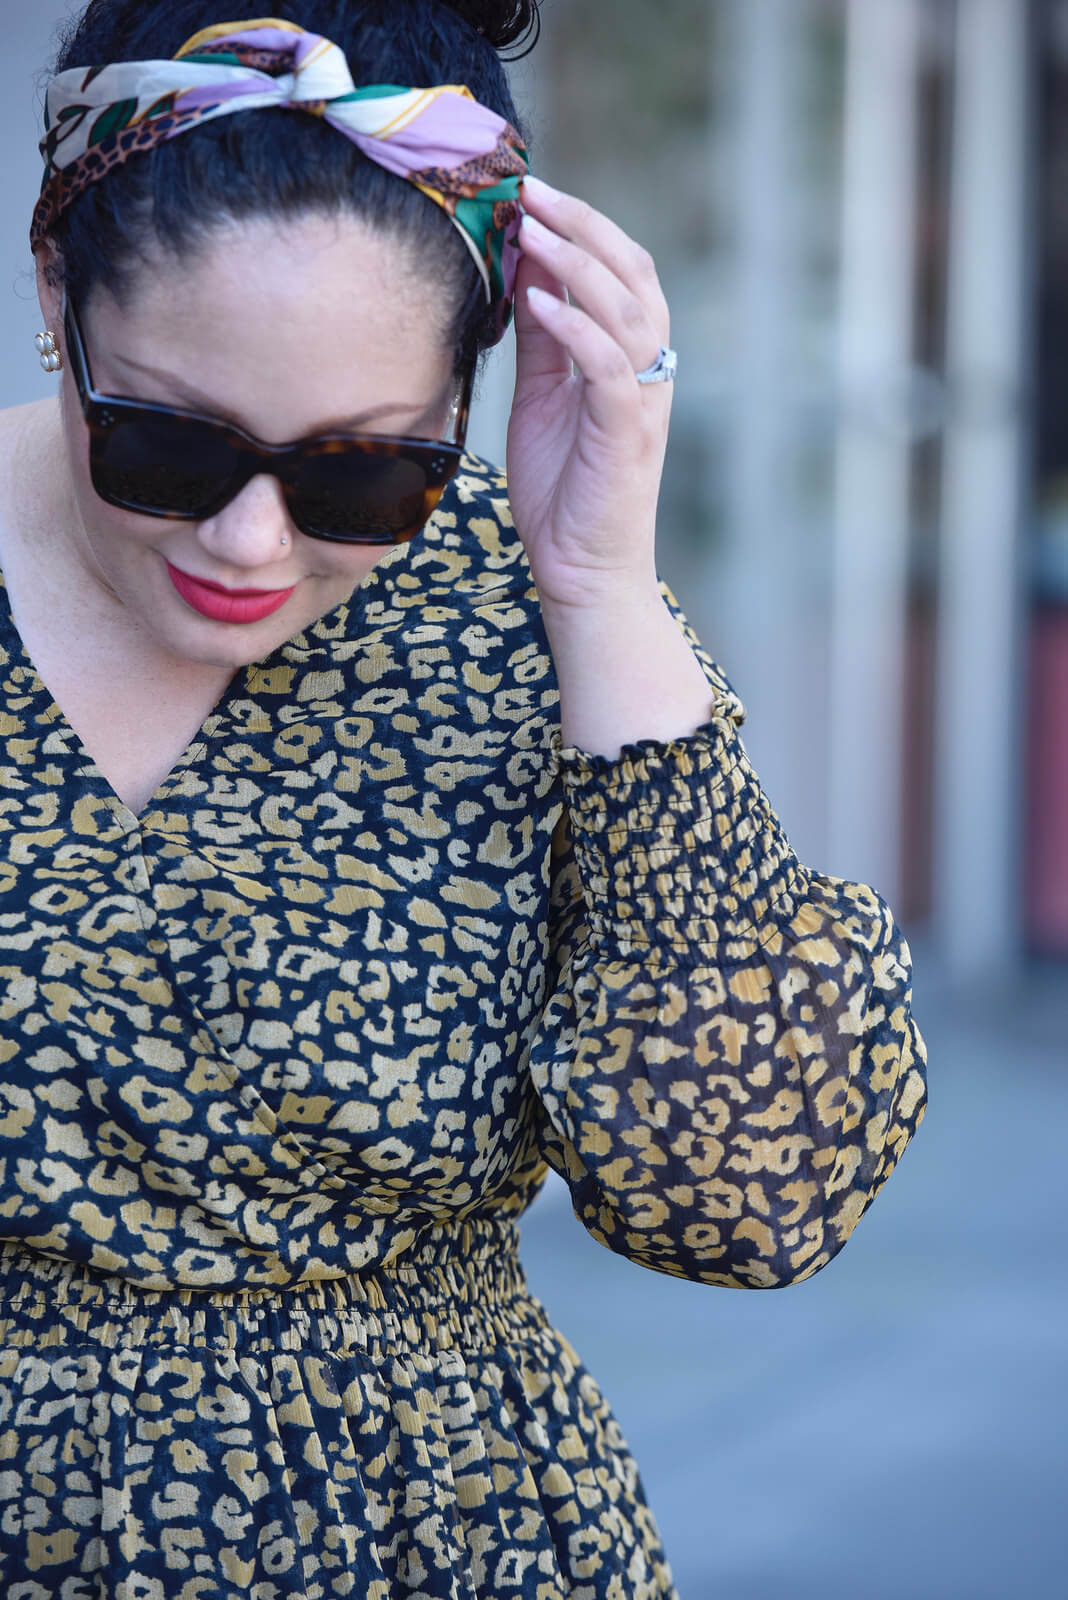 Featuring Leapord Print Long Sleave Dress By Whowhatwear, Sunglasses By Celine, And A Headband via @GirlWithCurves